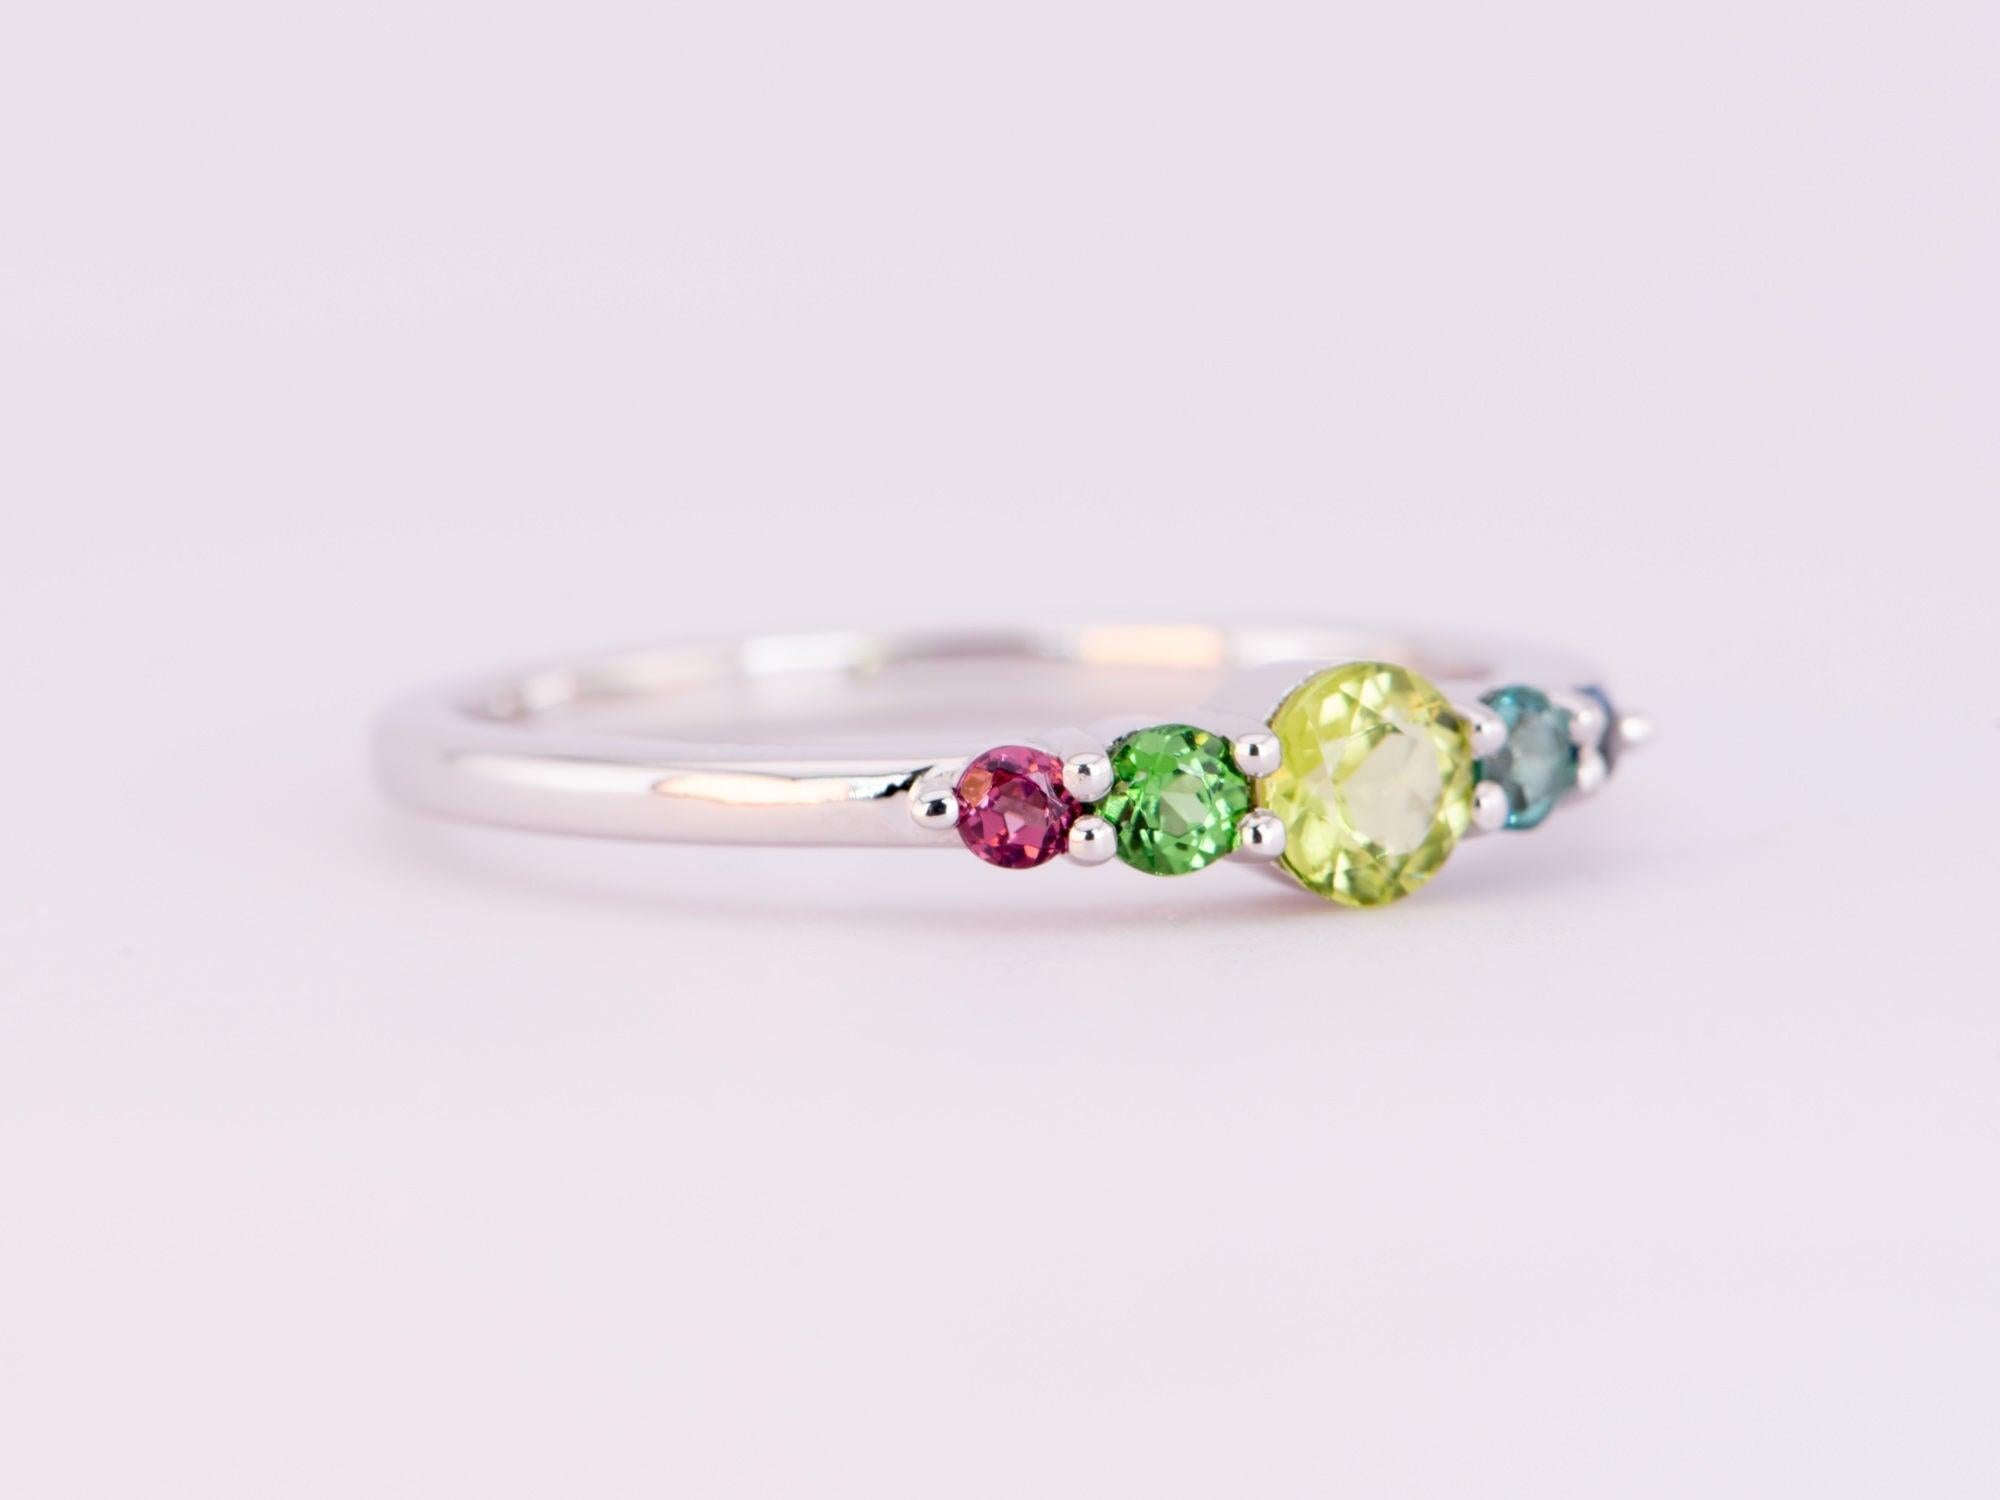 ♥ Mixed Tourmaline Wedding Band 14K Gold
♥ The item measures 4mm in length, 14mm in width, and 3.4mm in height.
♥ Material: 14K Gold
♥ Gemstone: Tourmaline, 0.52-0.65ct 
♥ Three rings available, each ring will receive free resizing up or down 1